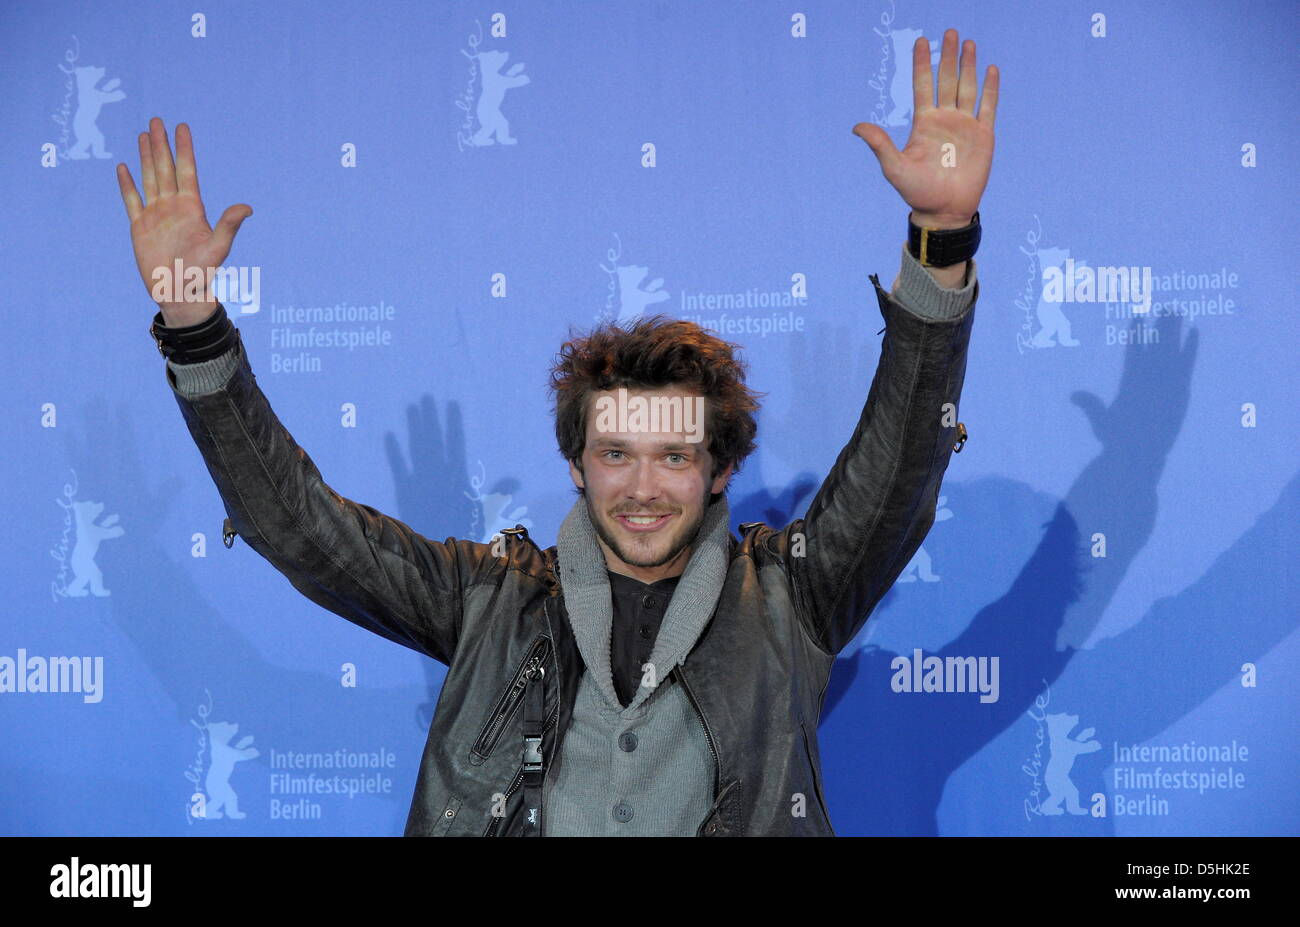 Russian actor Grigory Dobrygin poses during the photocall of the film 'How I Ended This Summer' running in competition during the 60th Berlinale International Film Festival in Berlin, Germany, Wednesday, 17 February 2010. The festival runs until 21 Febuary 2010. Photo: Soeren Stache dpa/lbn Stock Photo